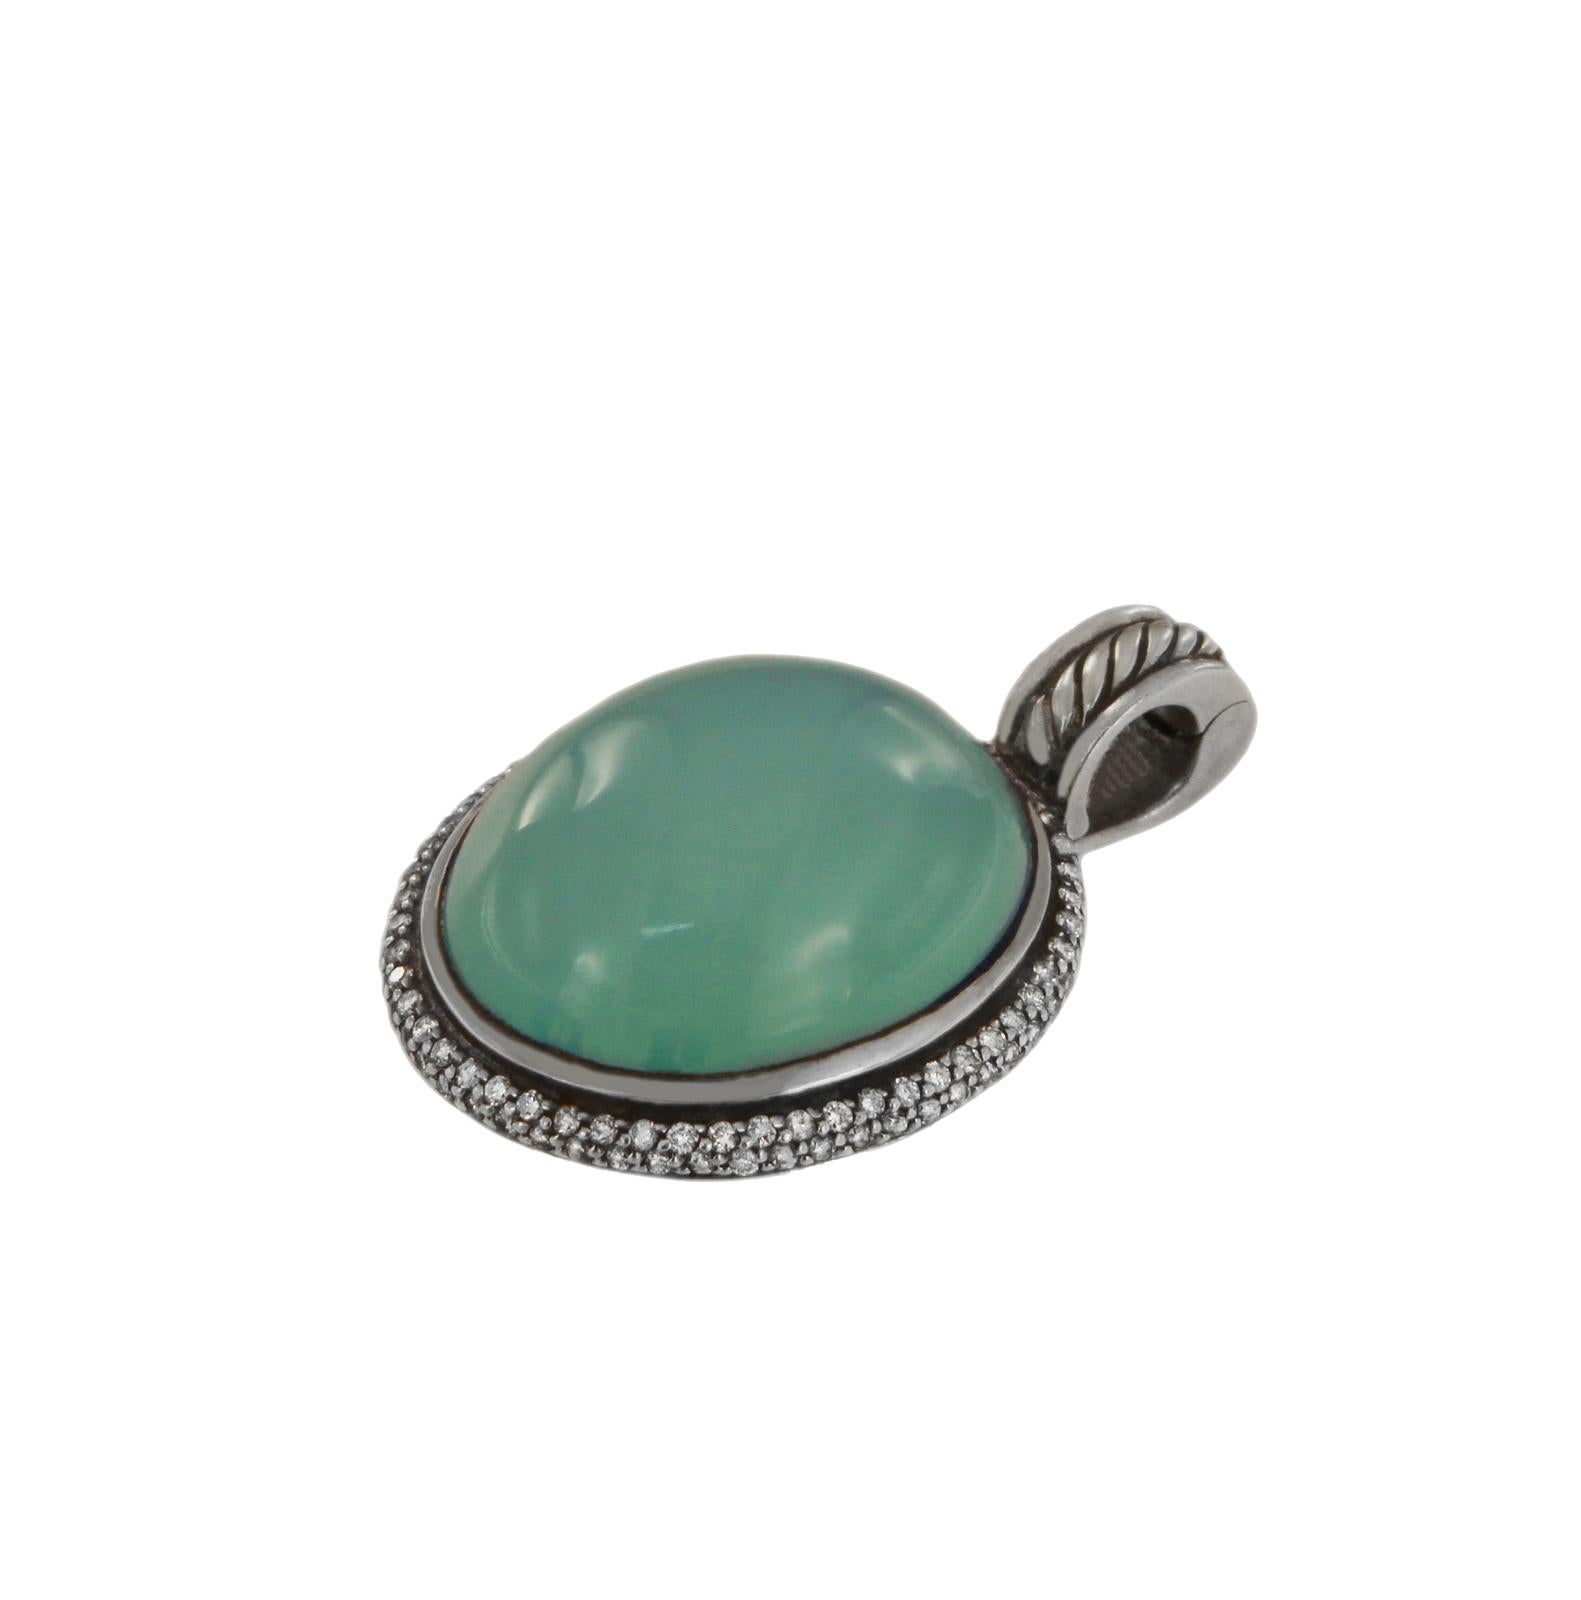 DAVID YURMAN OVAL CHALCEDONY PENDANT WITH DIAMONDS.

-Mint condition
-Sterling silver
-Chalcedony dimension: 20x24mm
-Chain is not included 

*Comes with David Yurman pouch.